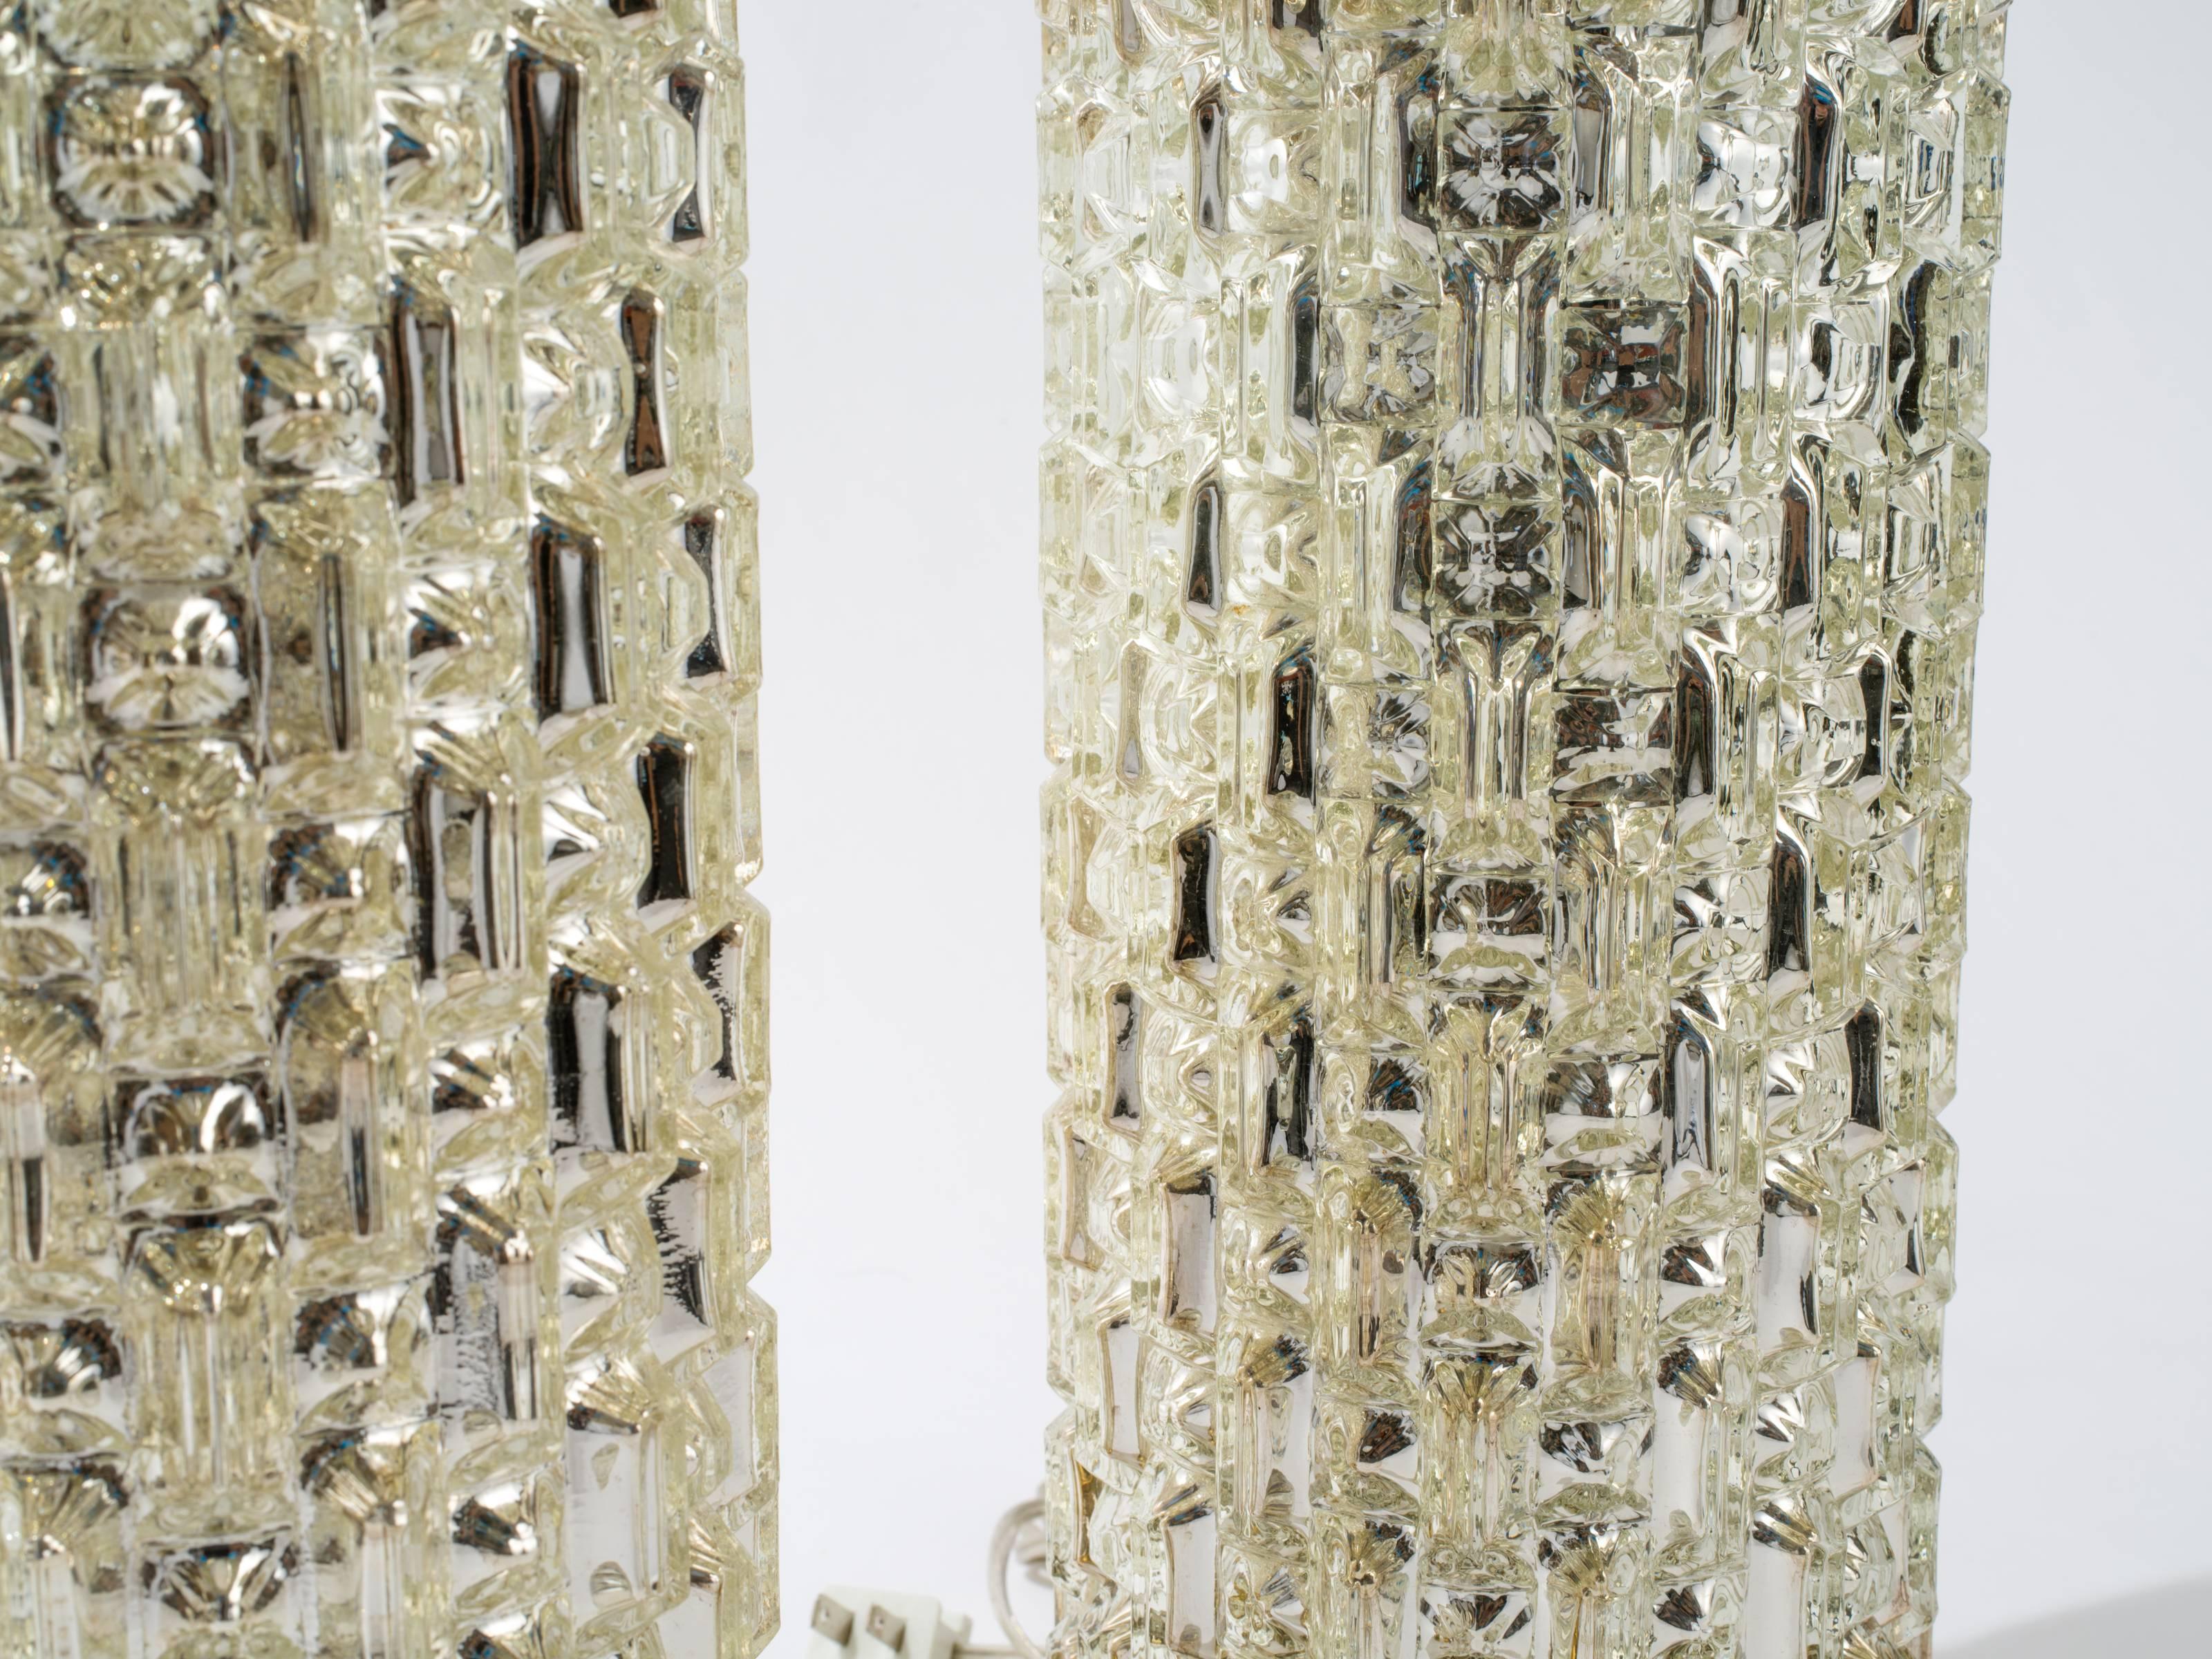 Pressed Textured Cylindrical Mercury Glass Lamps